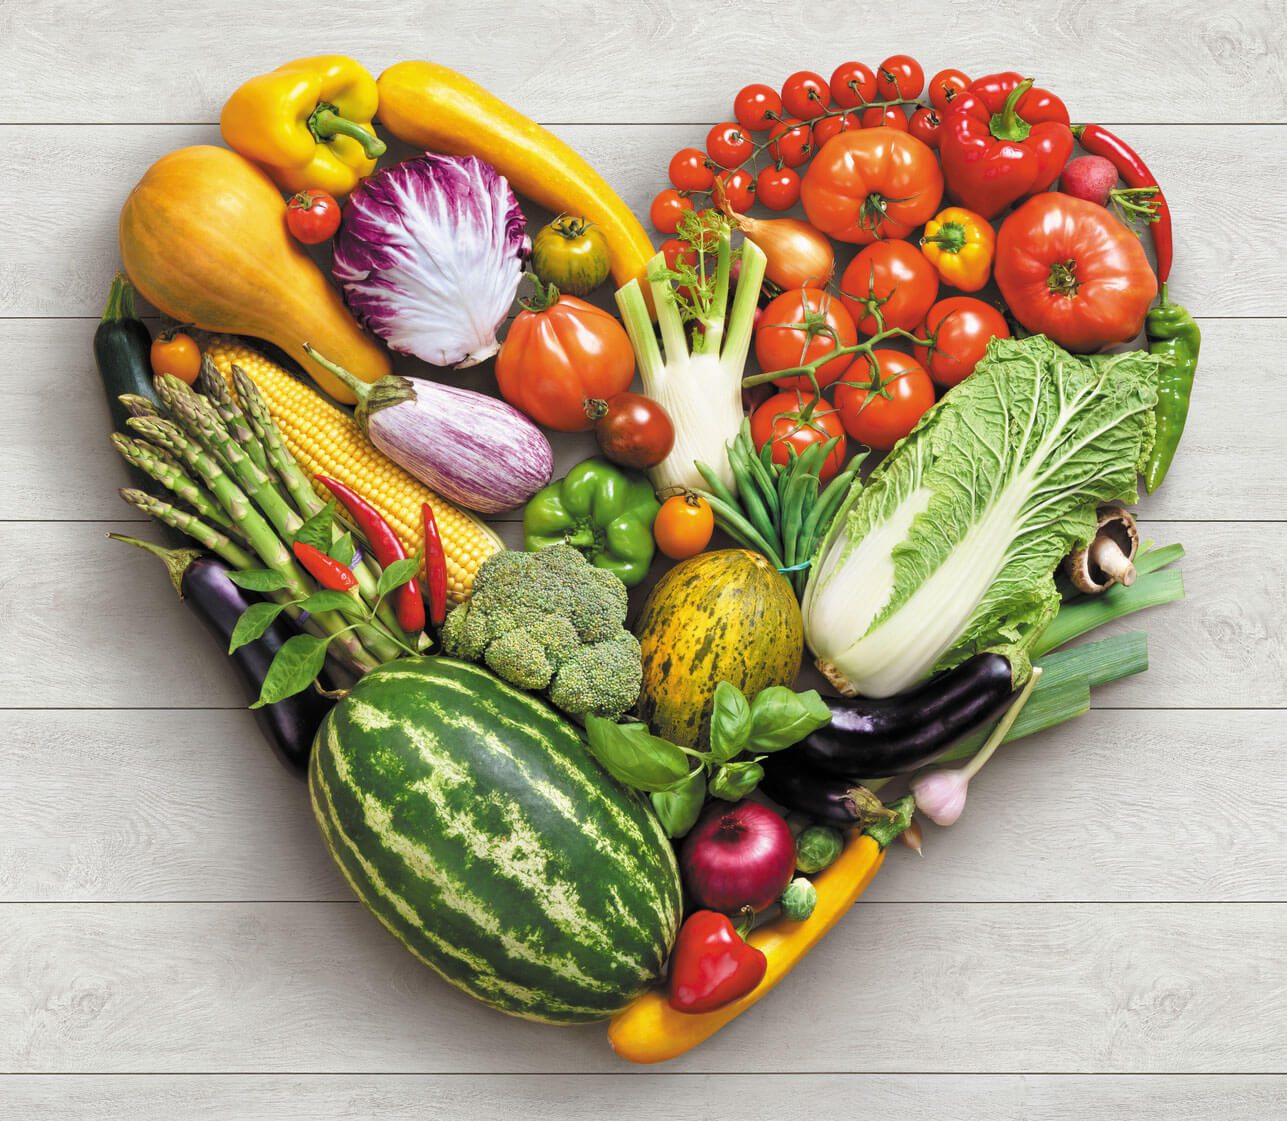 Adoption of a plant based diet reduces risk of heart diseases by 32% Research